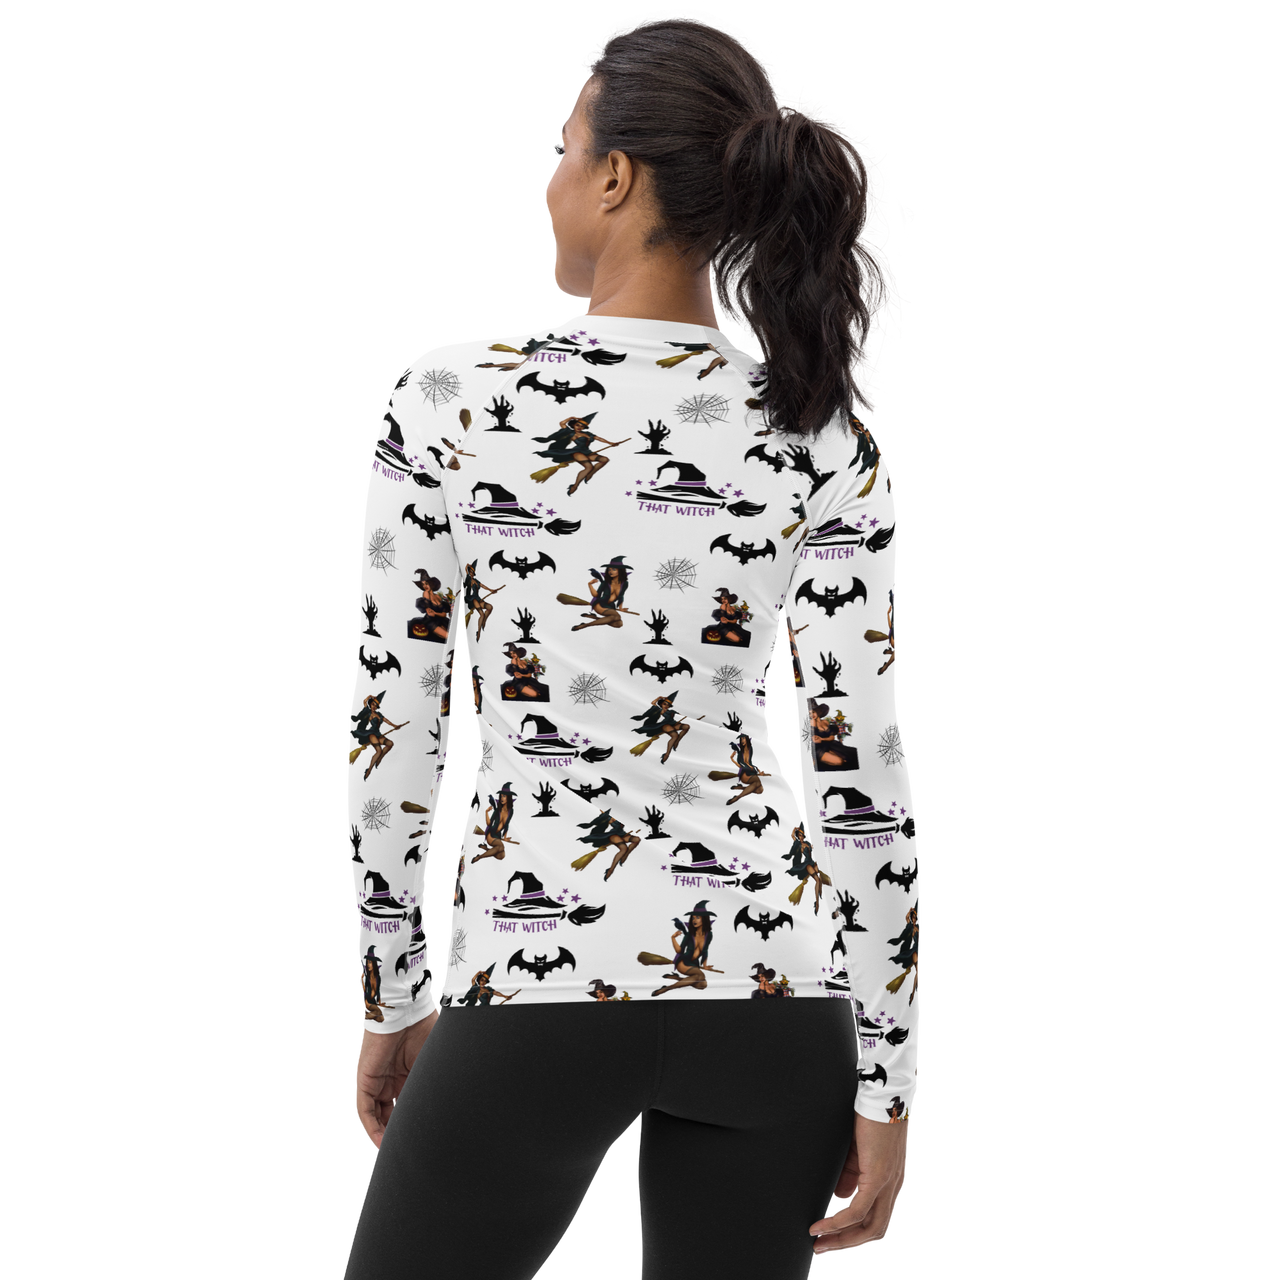 Women's Halloween All Over Print Long Sleeve Shirt, Halloween All Over Print Shirt, Women's Long  Sleeve Shirt /That Witch SHAVA